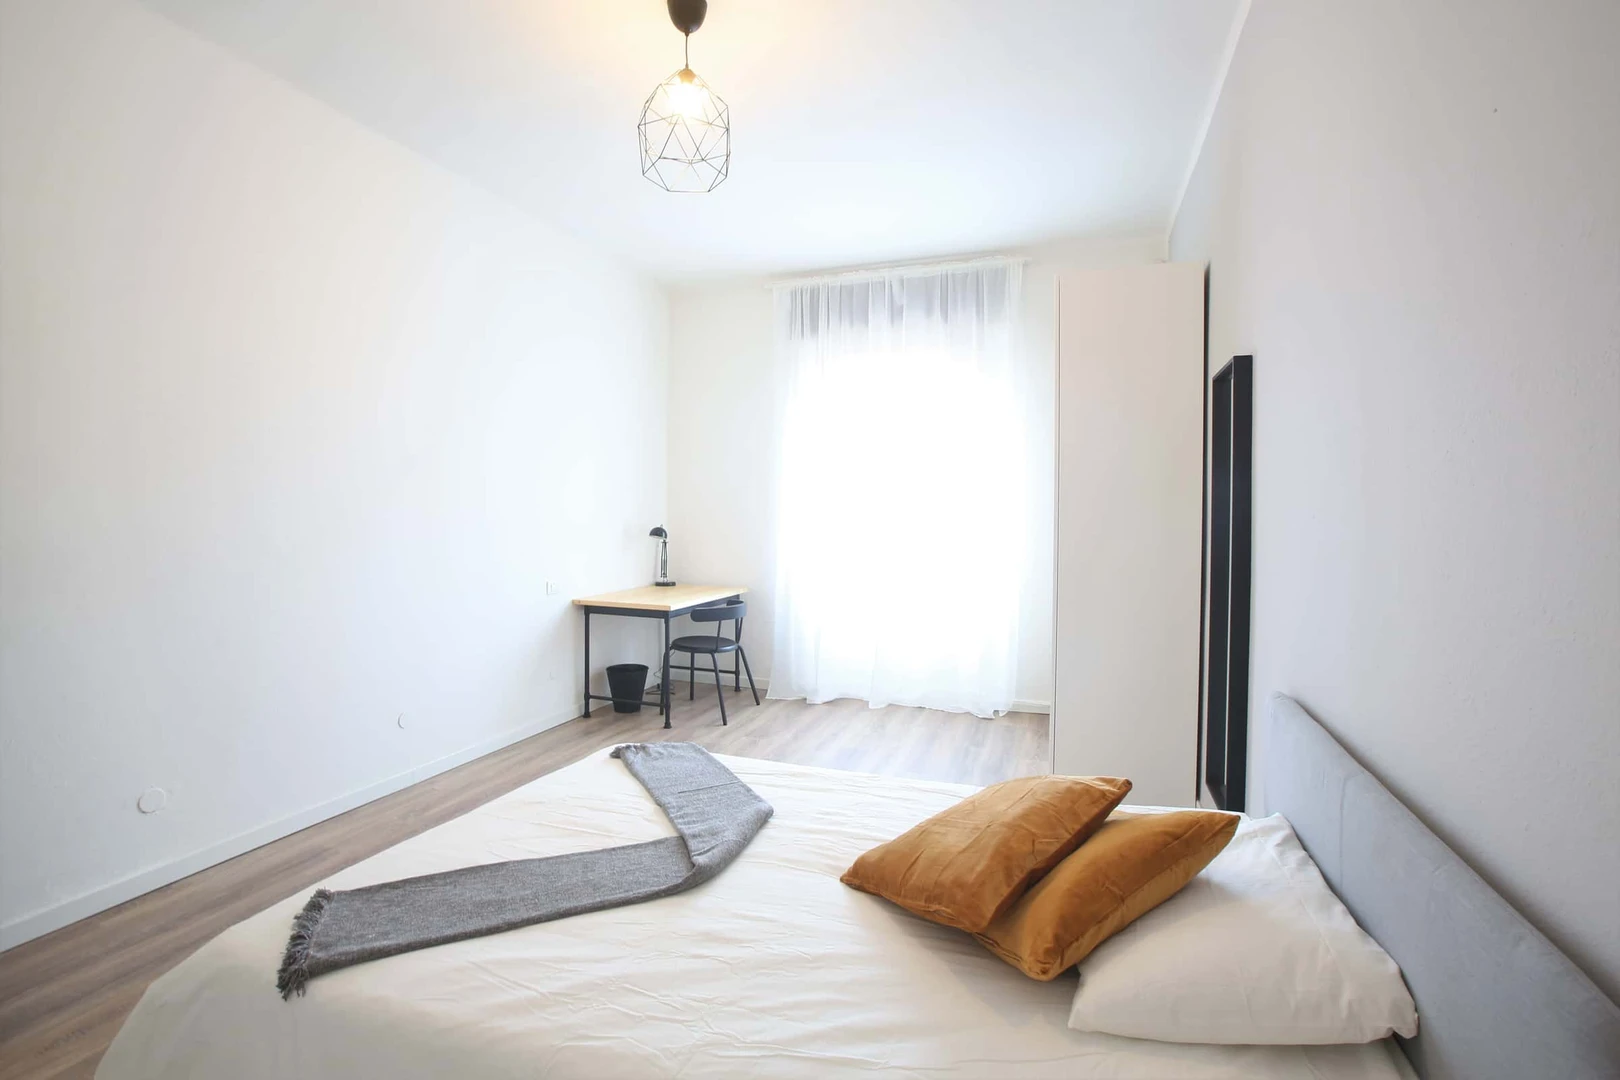 Renting rooms by the month in modena